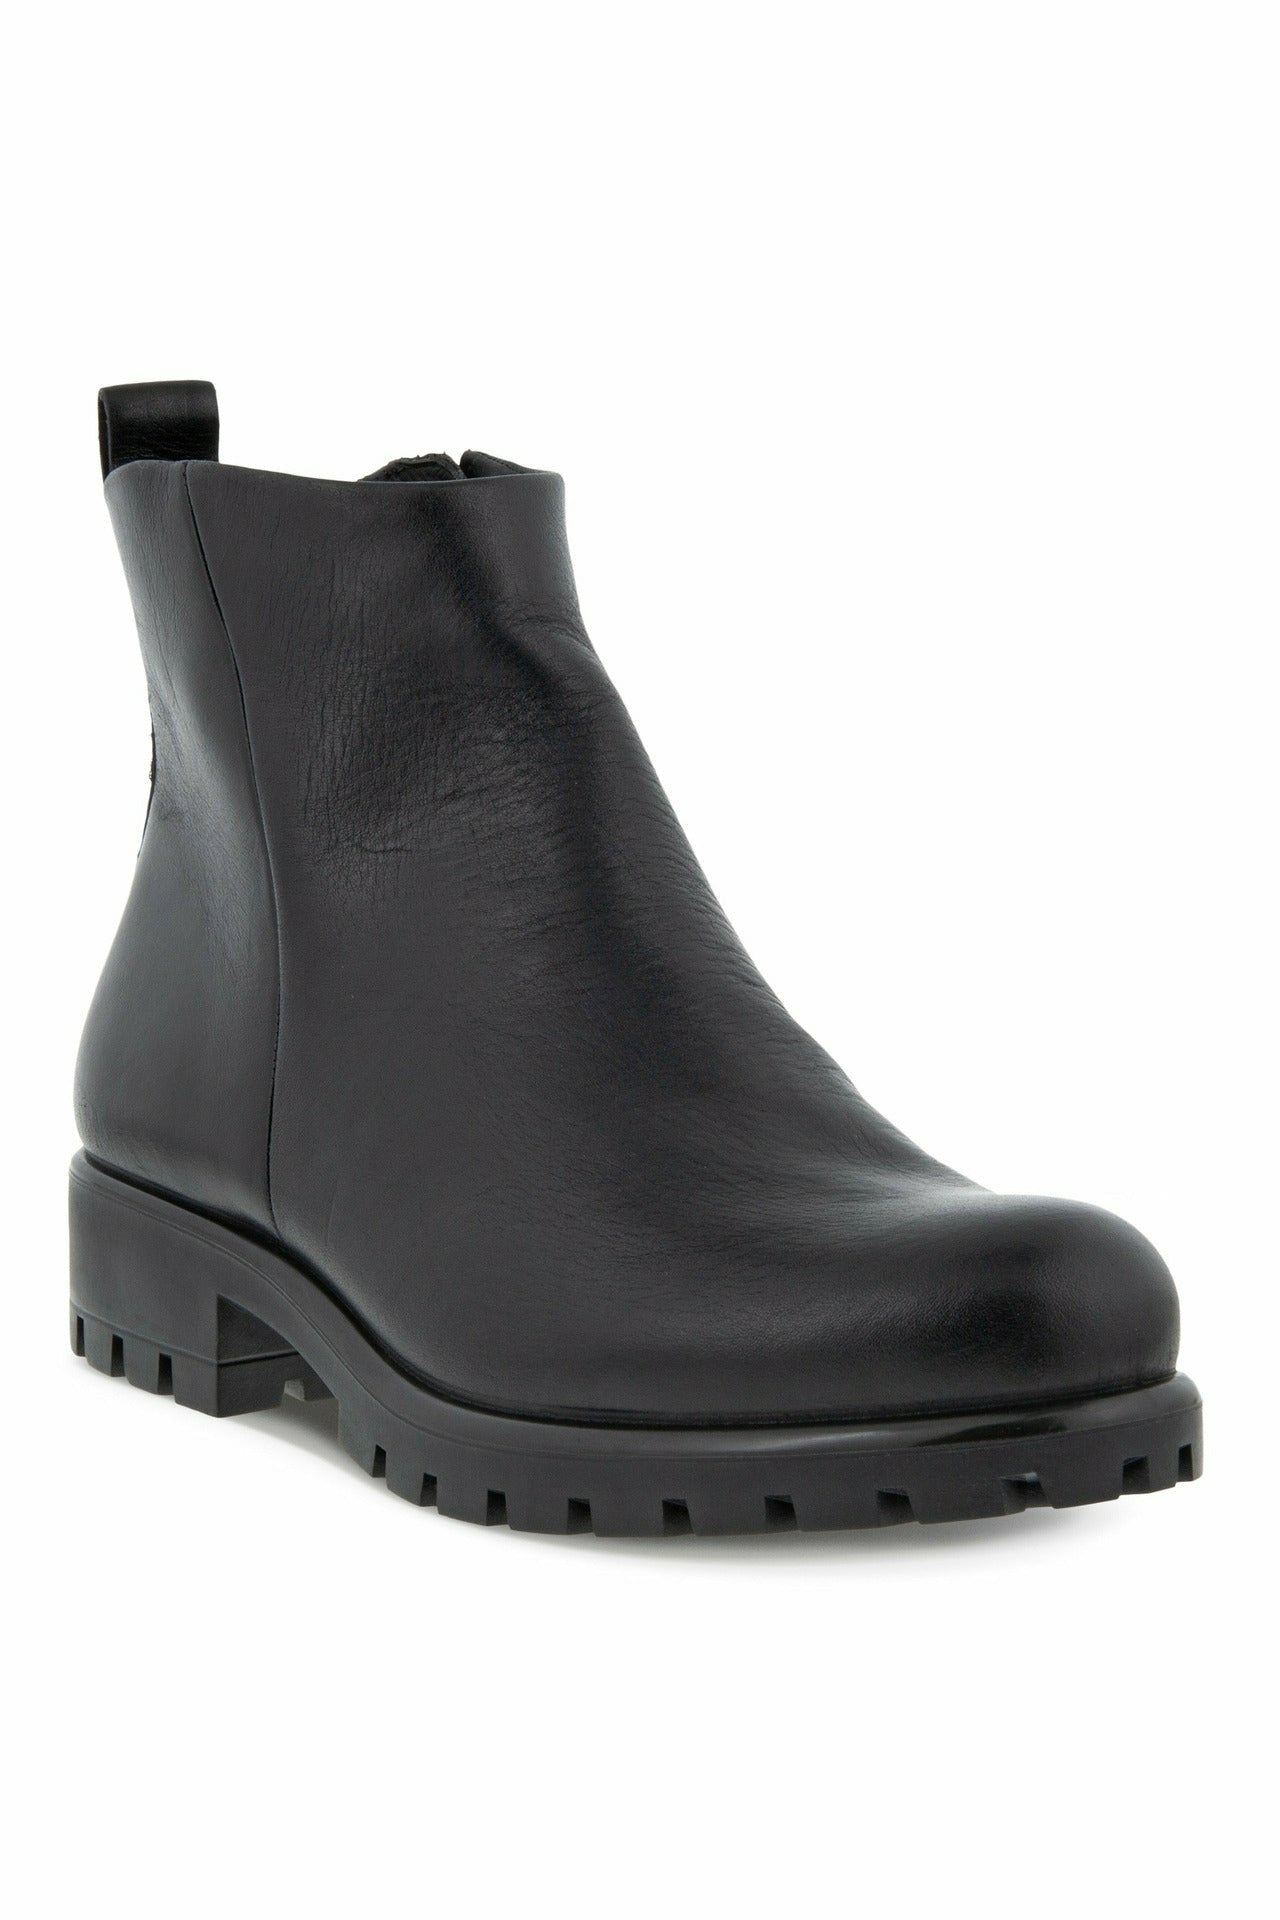 ECCO  Modtray Ankle Boot 490063-01001 black leather